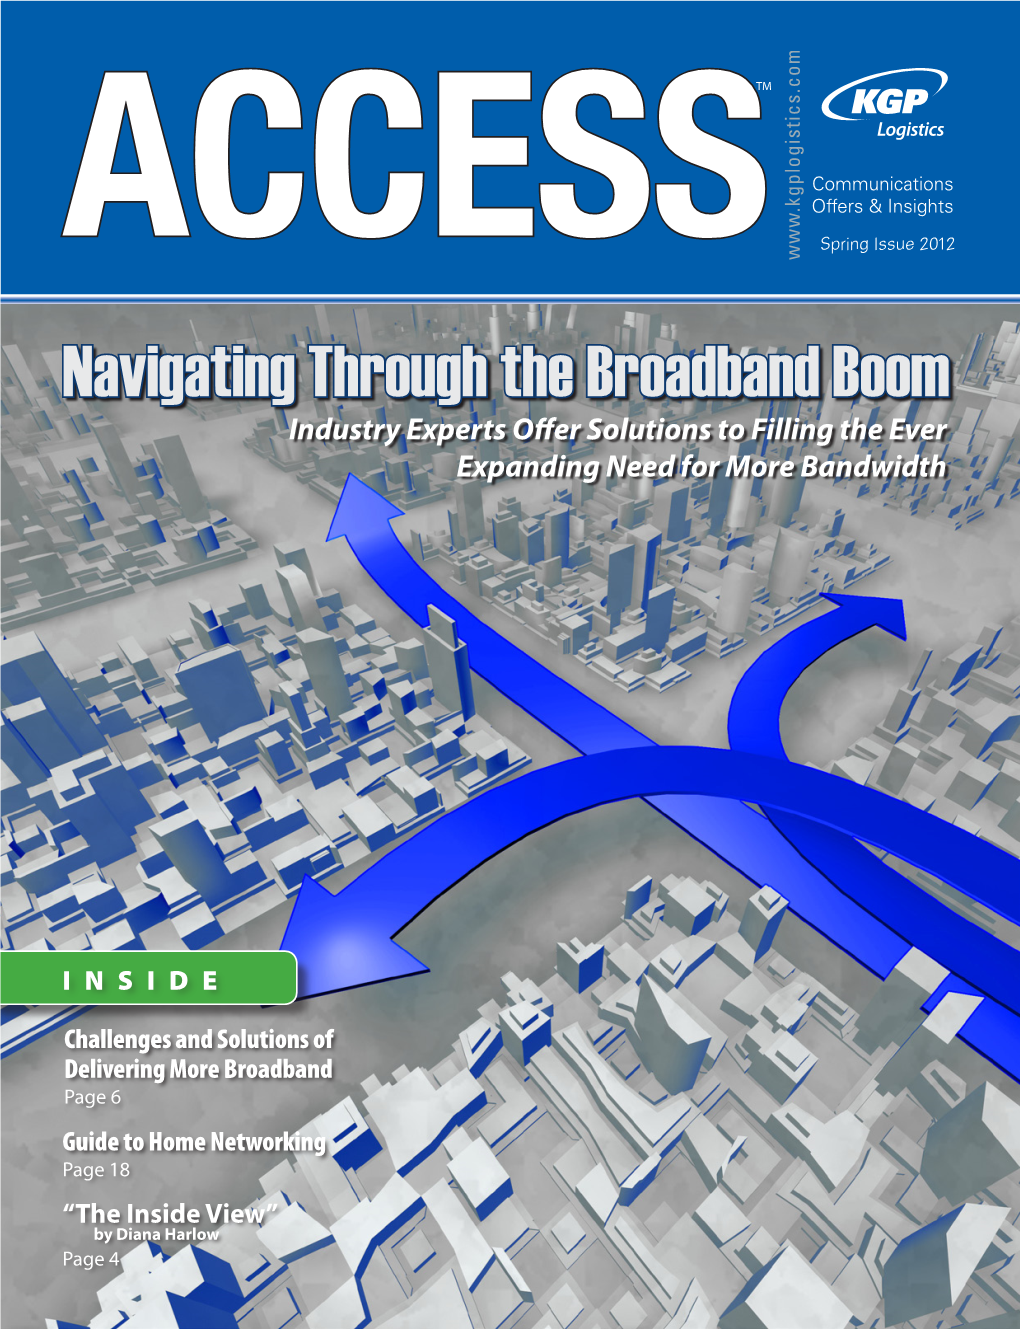 Navigating Through the Broadband Boom Industry Experts Offer Solutions to Filling the Ever Expanding Need for More Bandwidth